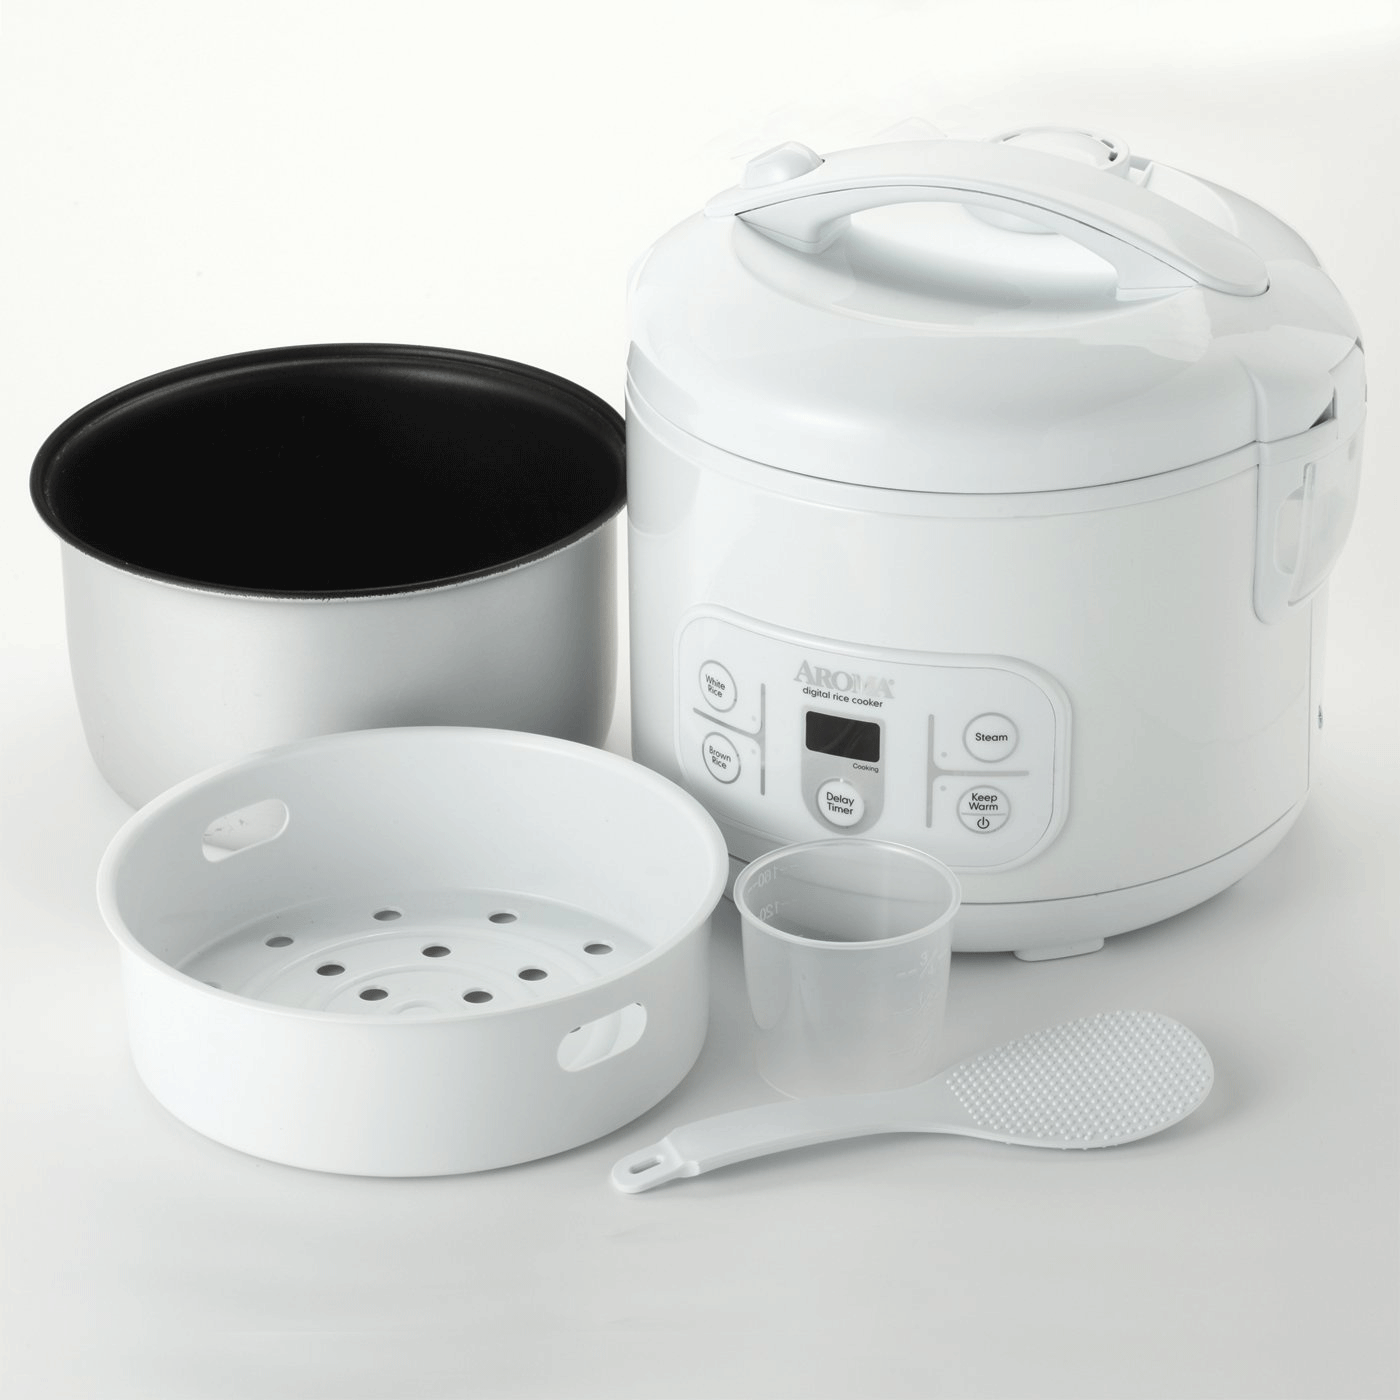 Aroma ARC-996 rice cooker | Best Aroma Rice Cookers Aroma Rice Cooker Arc 996 Manual